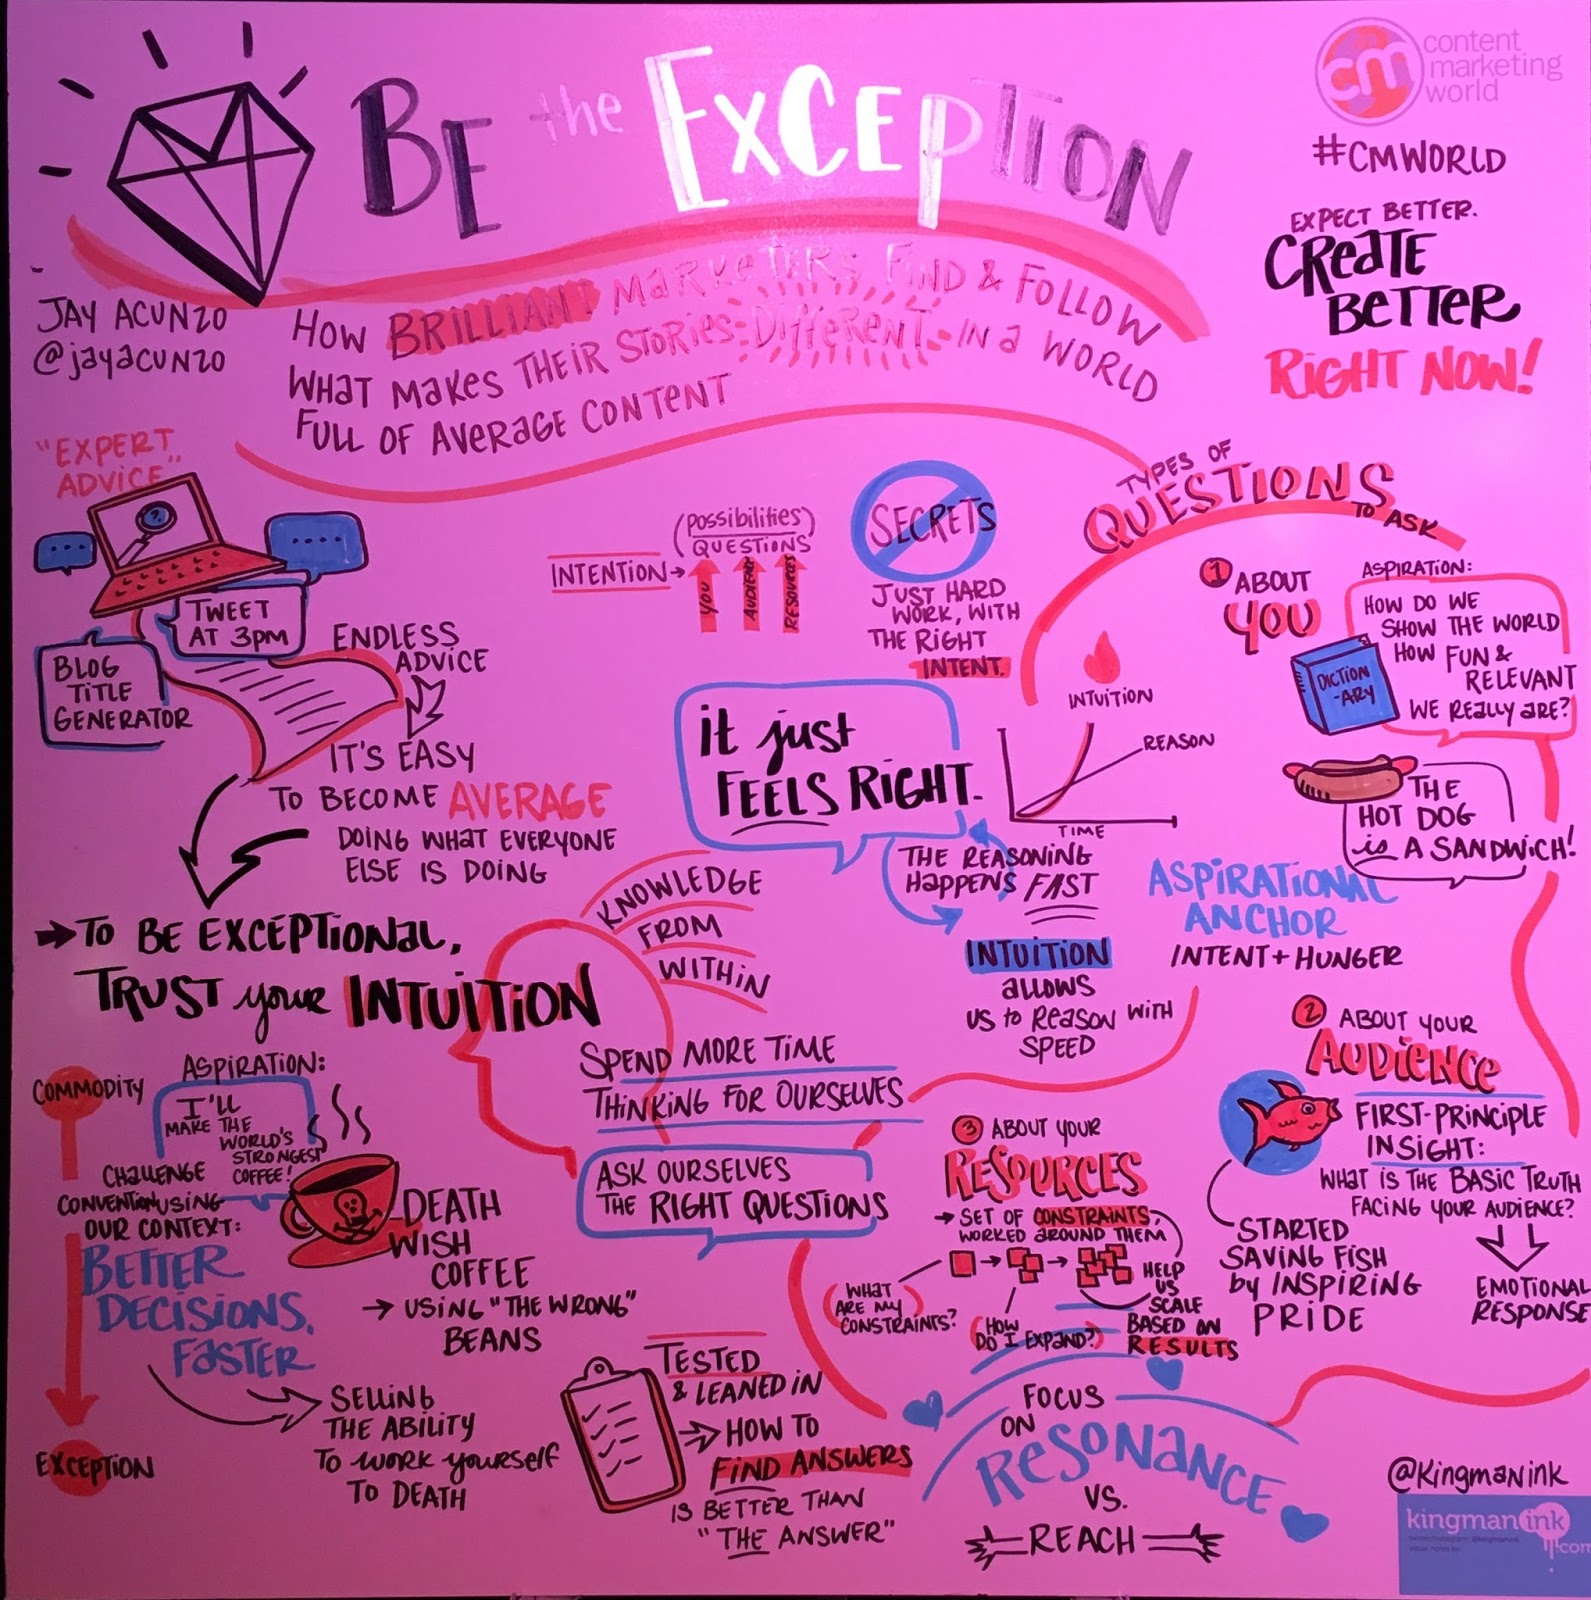 Illustration of Jay Acunzo's Presentation at Content Marketing 2017